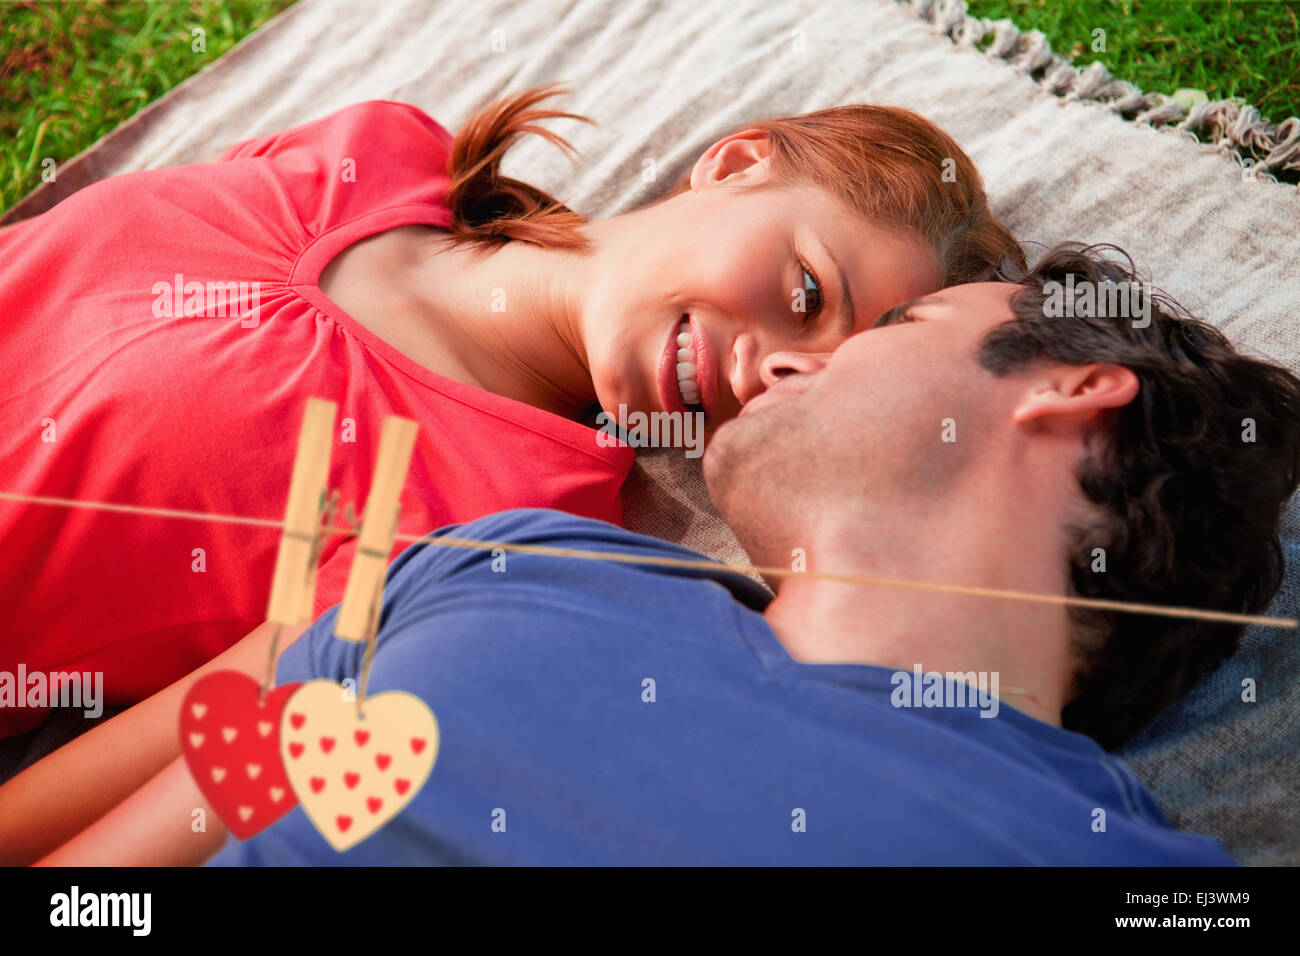 Composite image of woman looking into her friends eyes while lying on a quilt Stock Photo